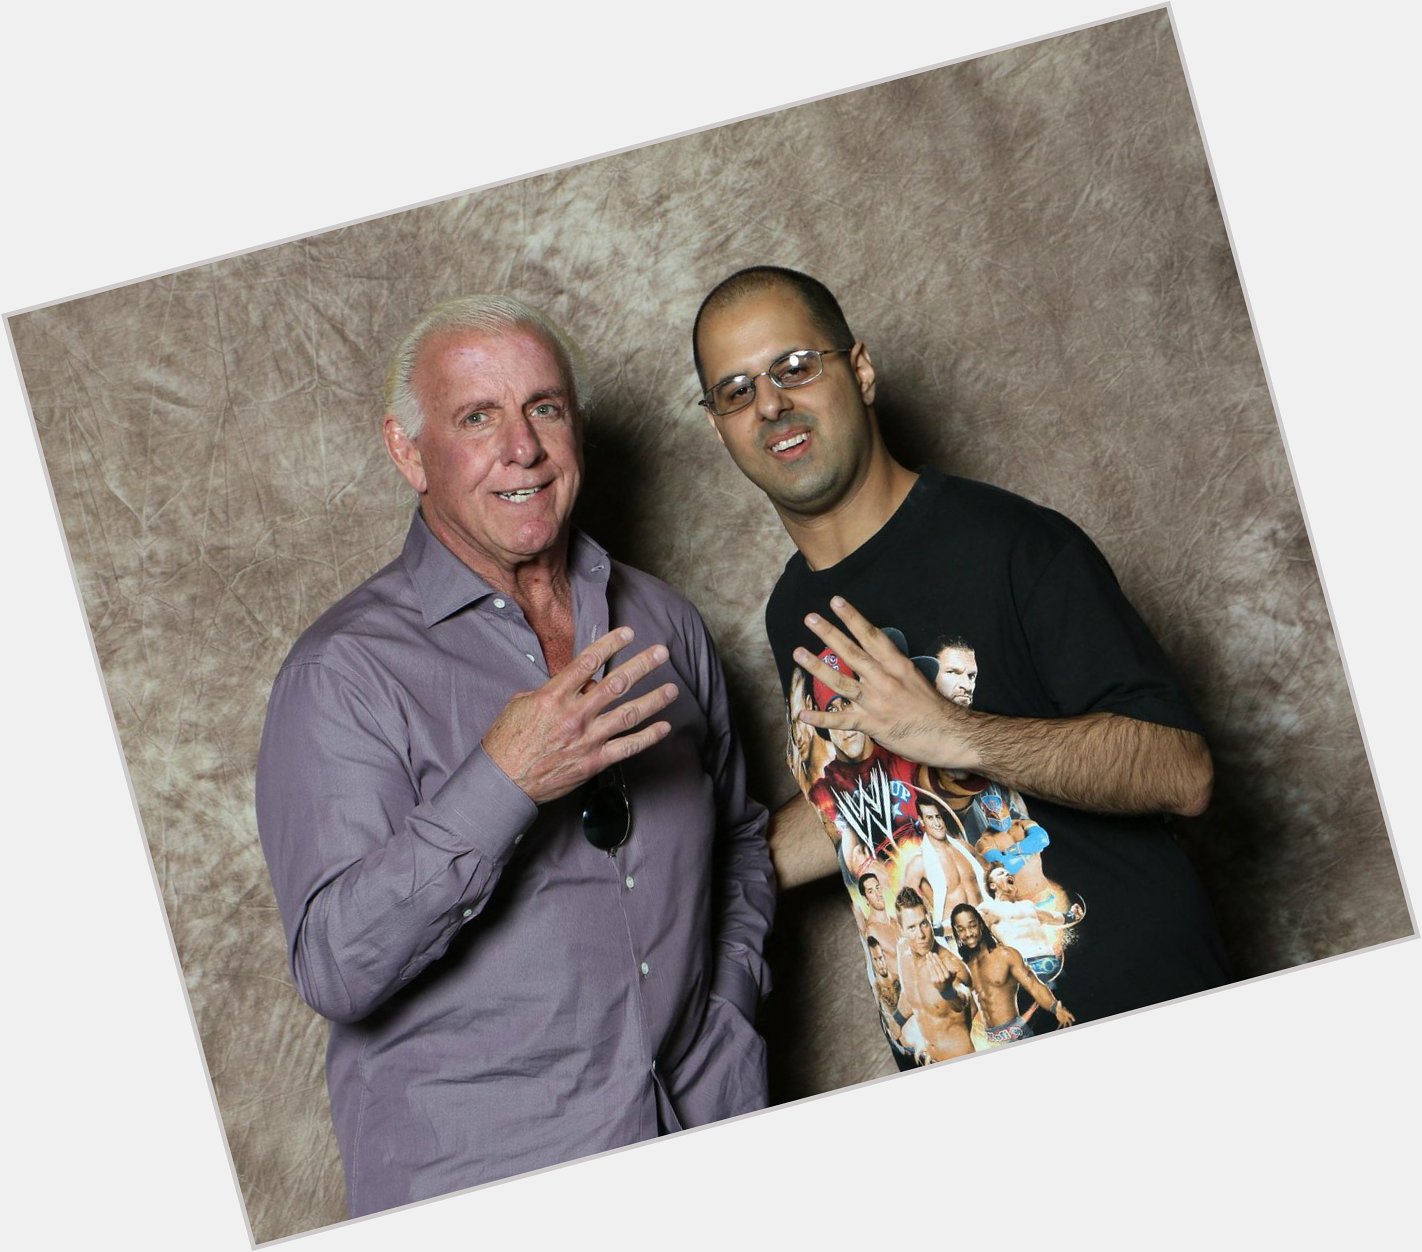  Wishing a happy birthday to the 16 time world champion, Ric Flair. 